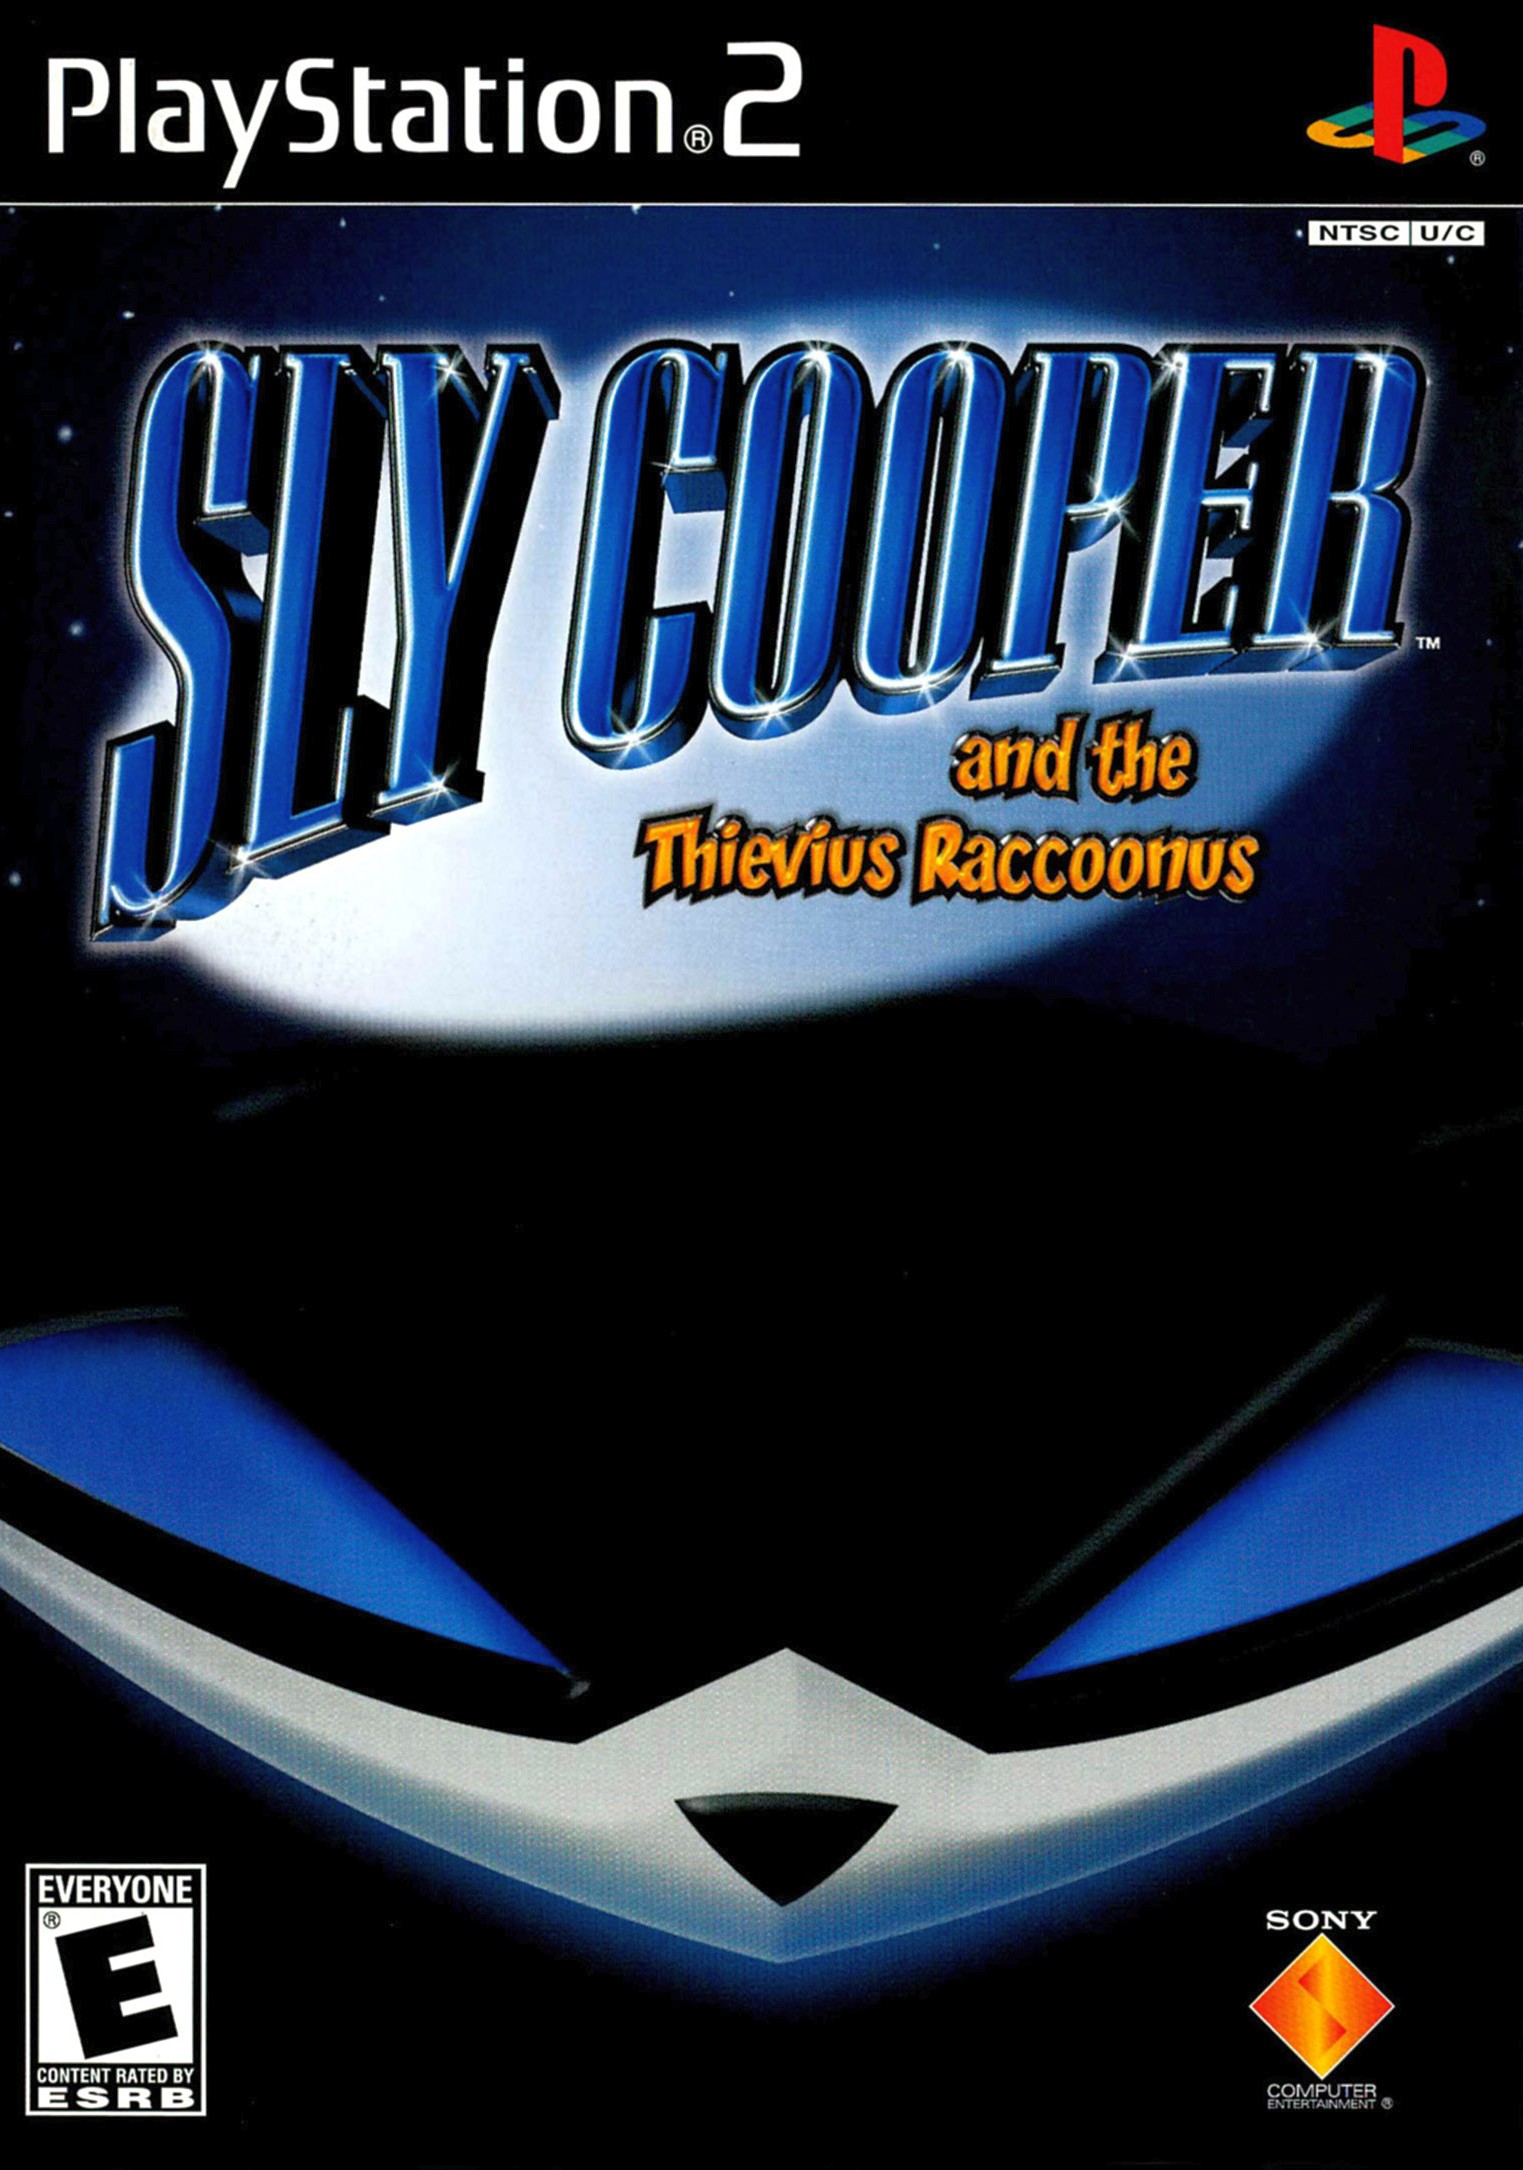 sly-cooper-and-the-thievius-raccoonus-details-launchbox-games-database